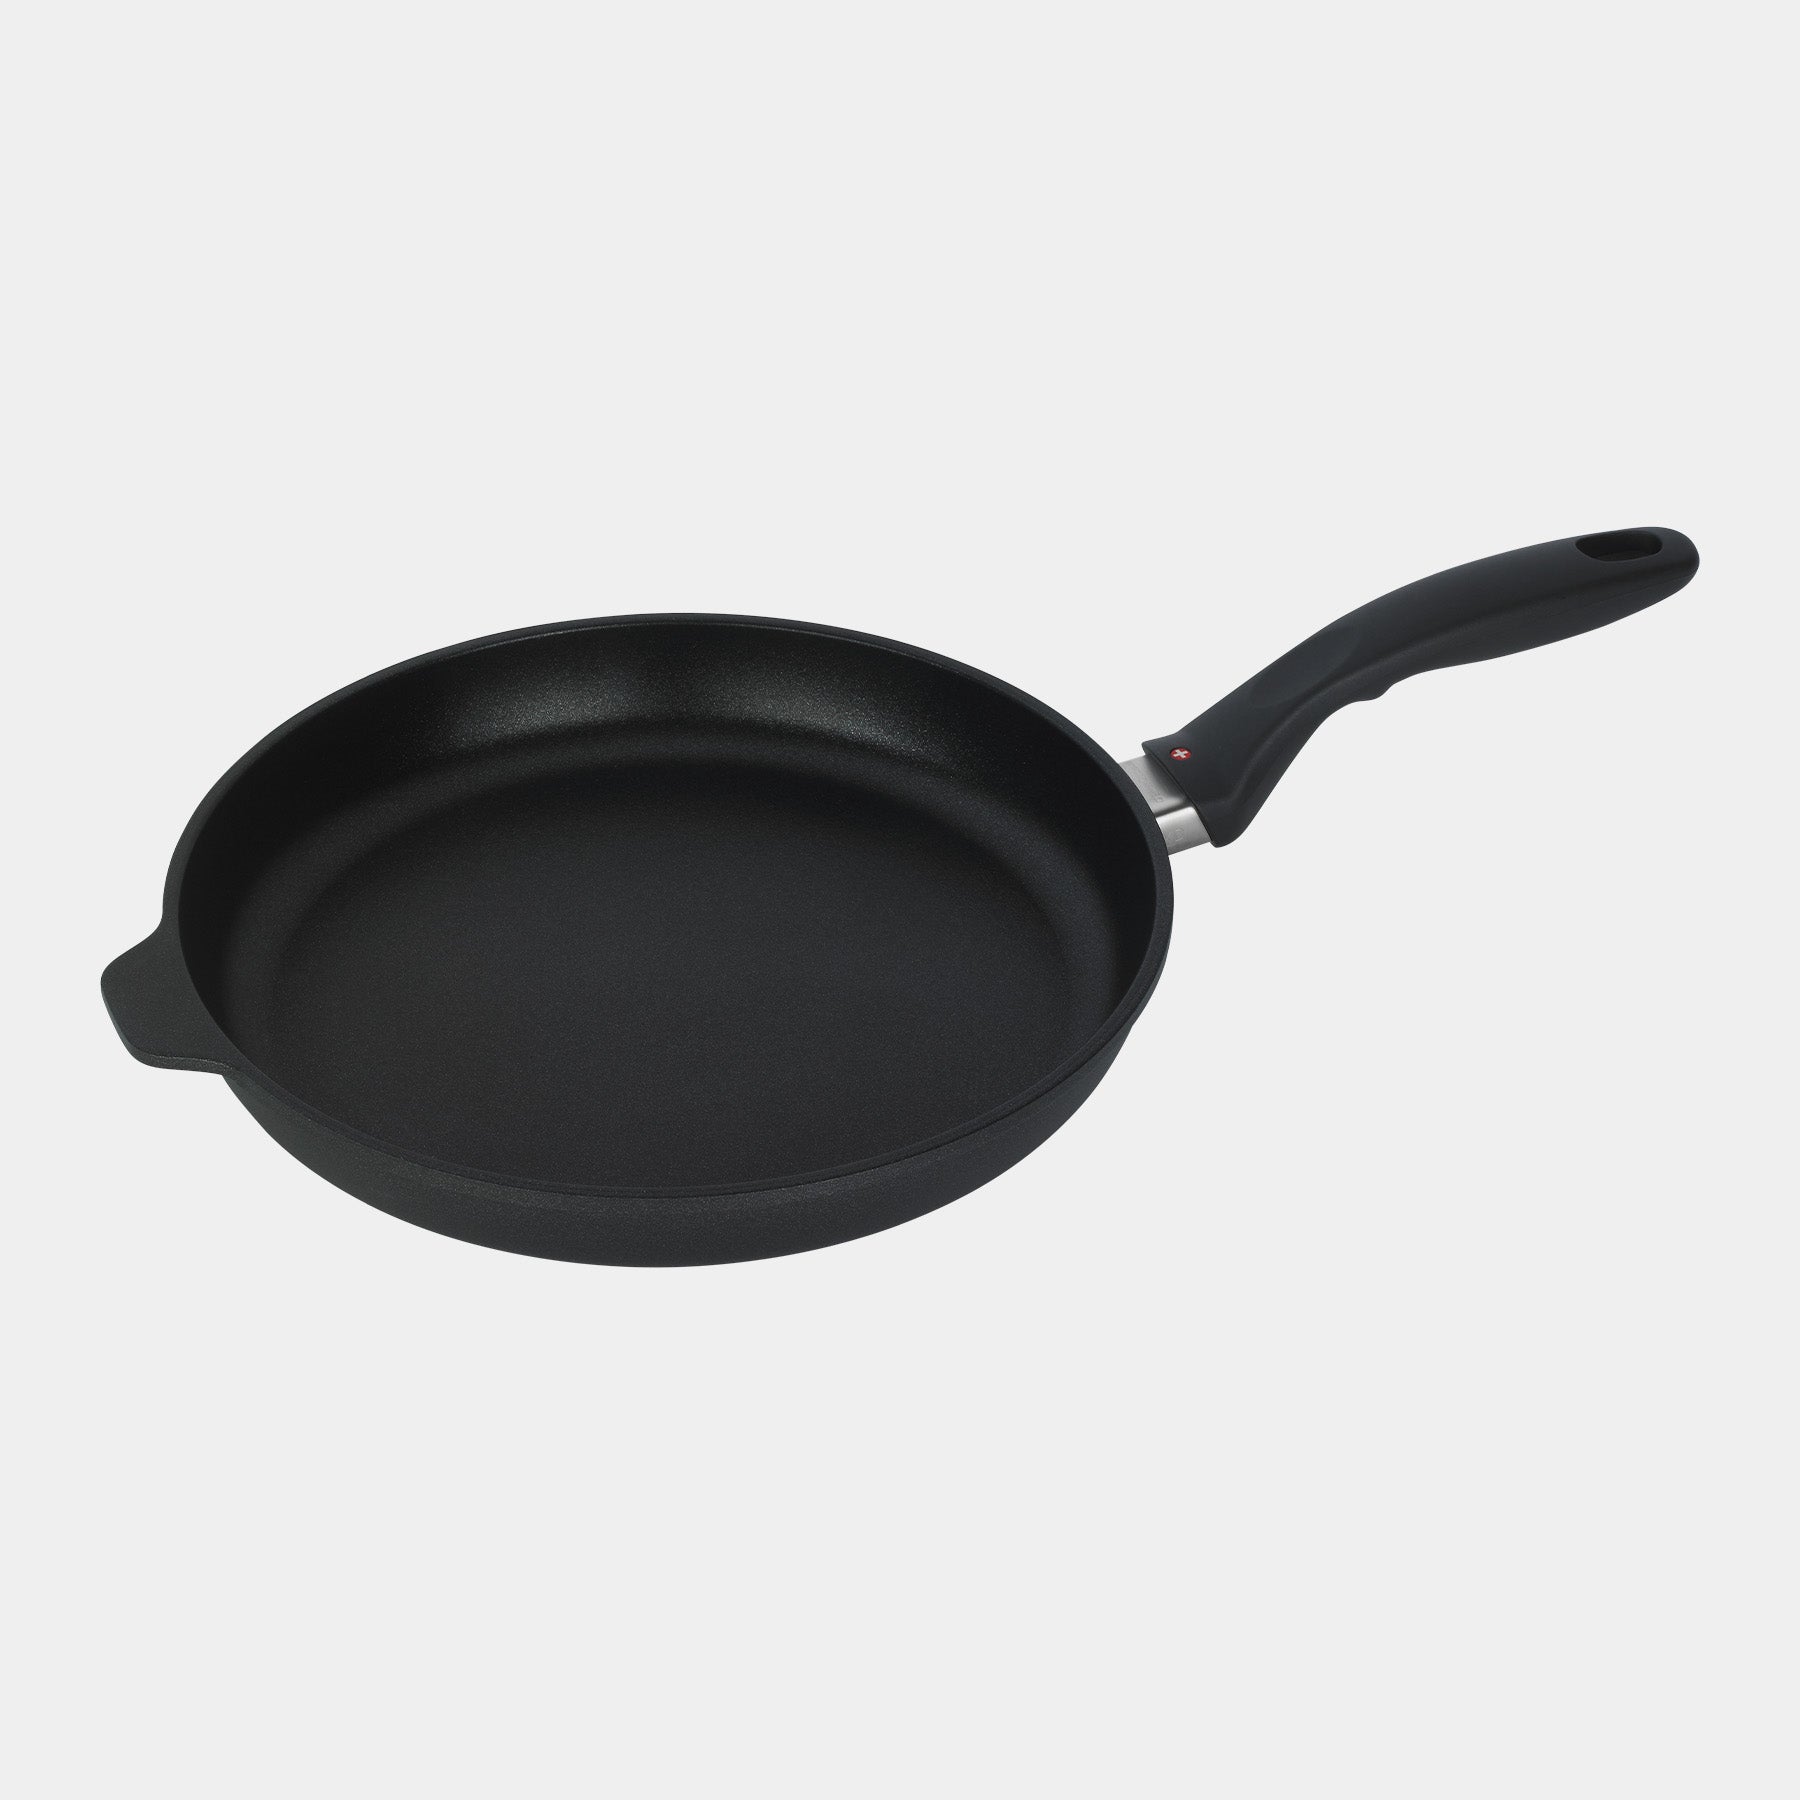 XD Nonstick 11" Fry Pan - Induction top view